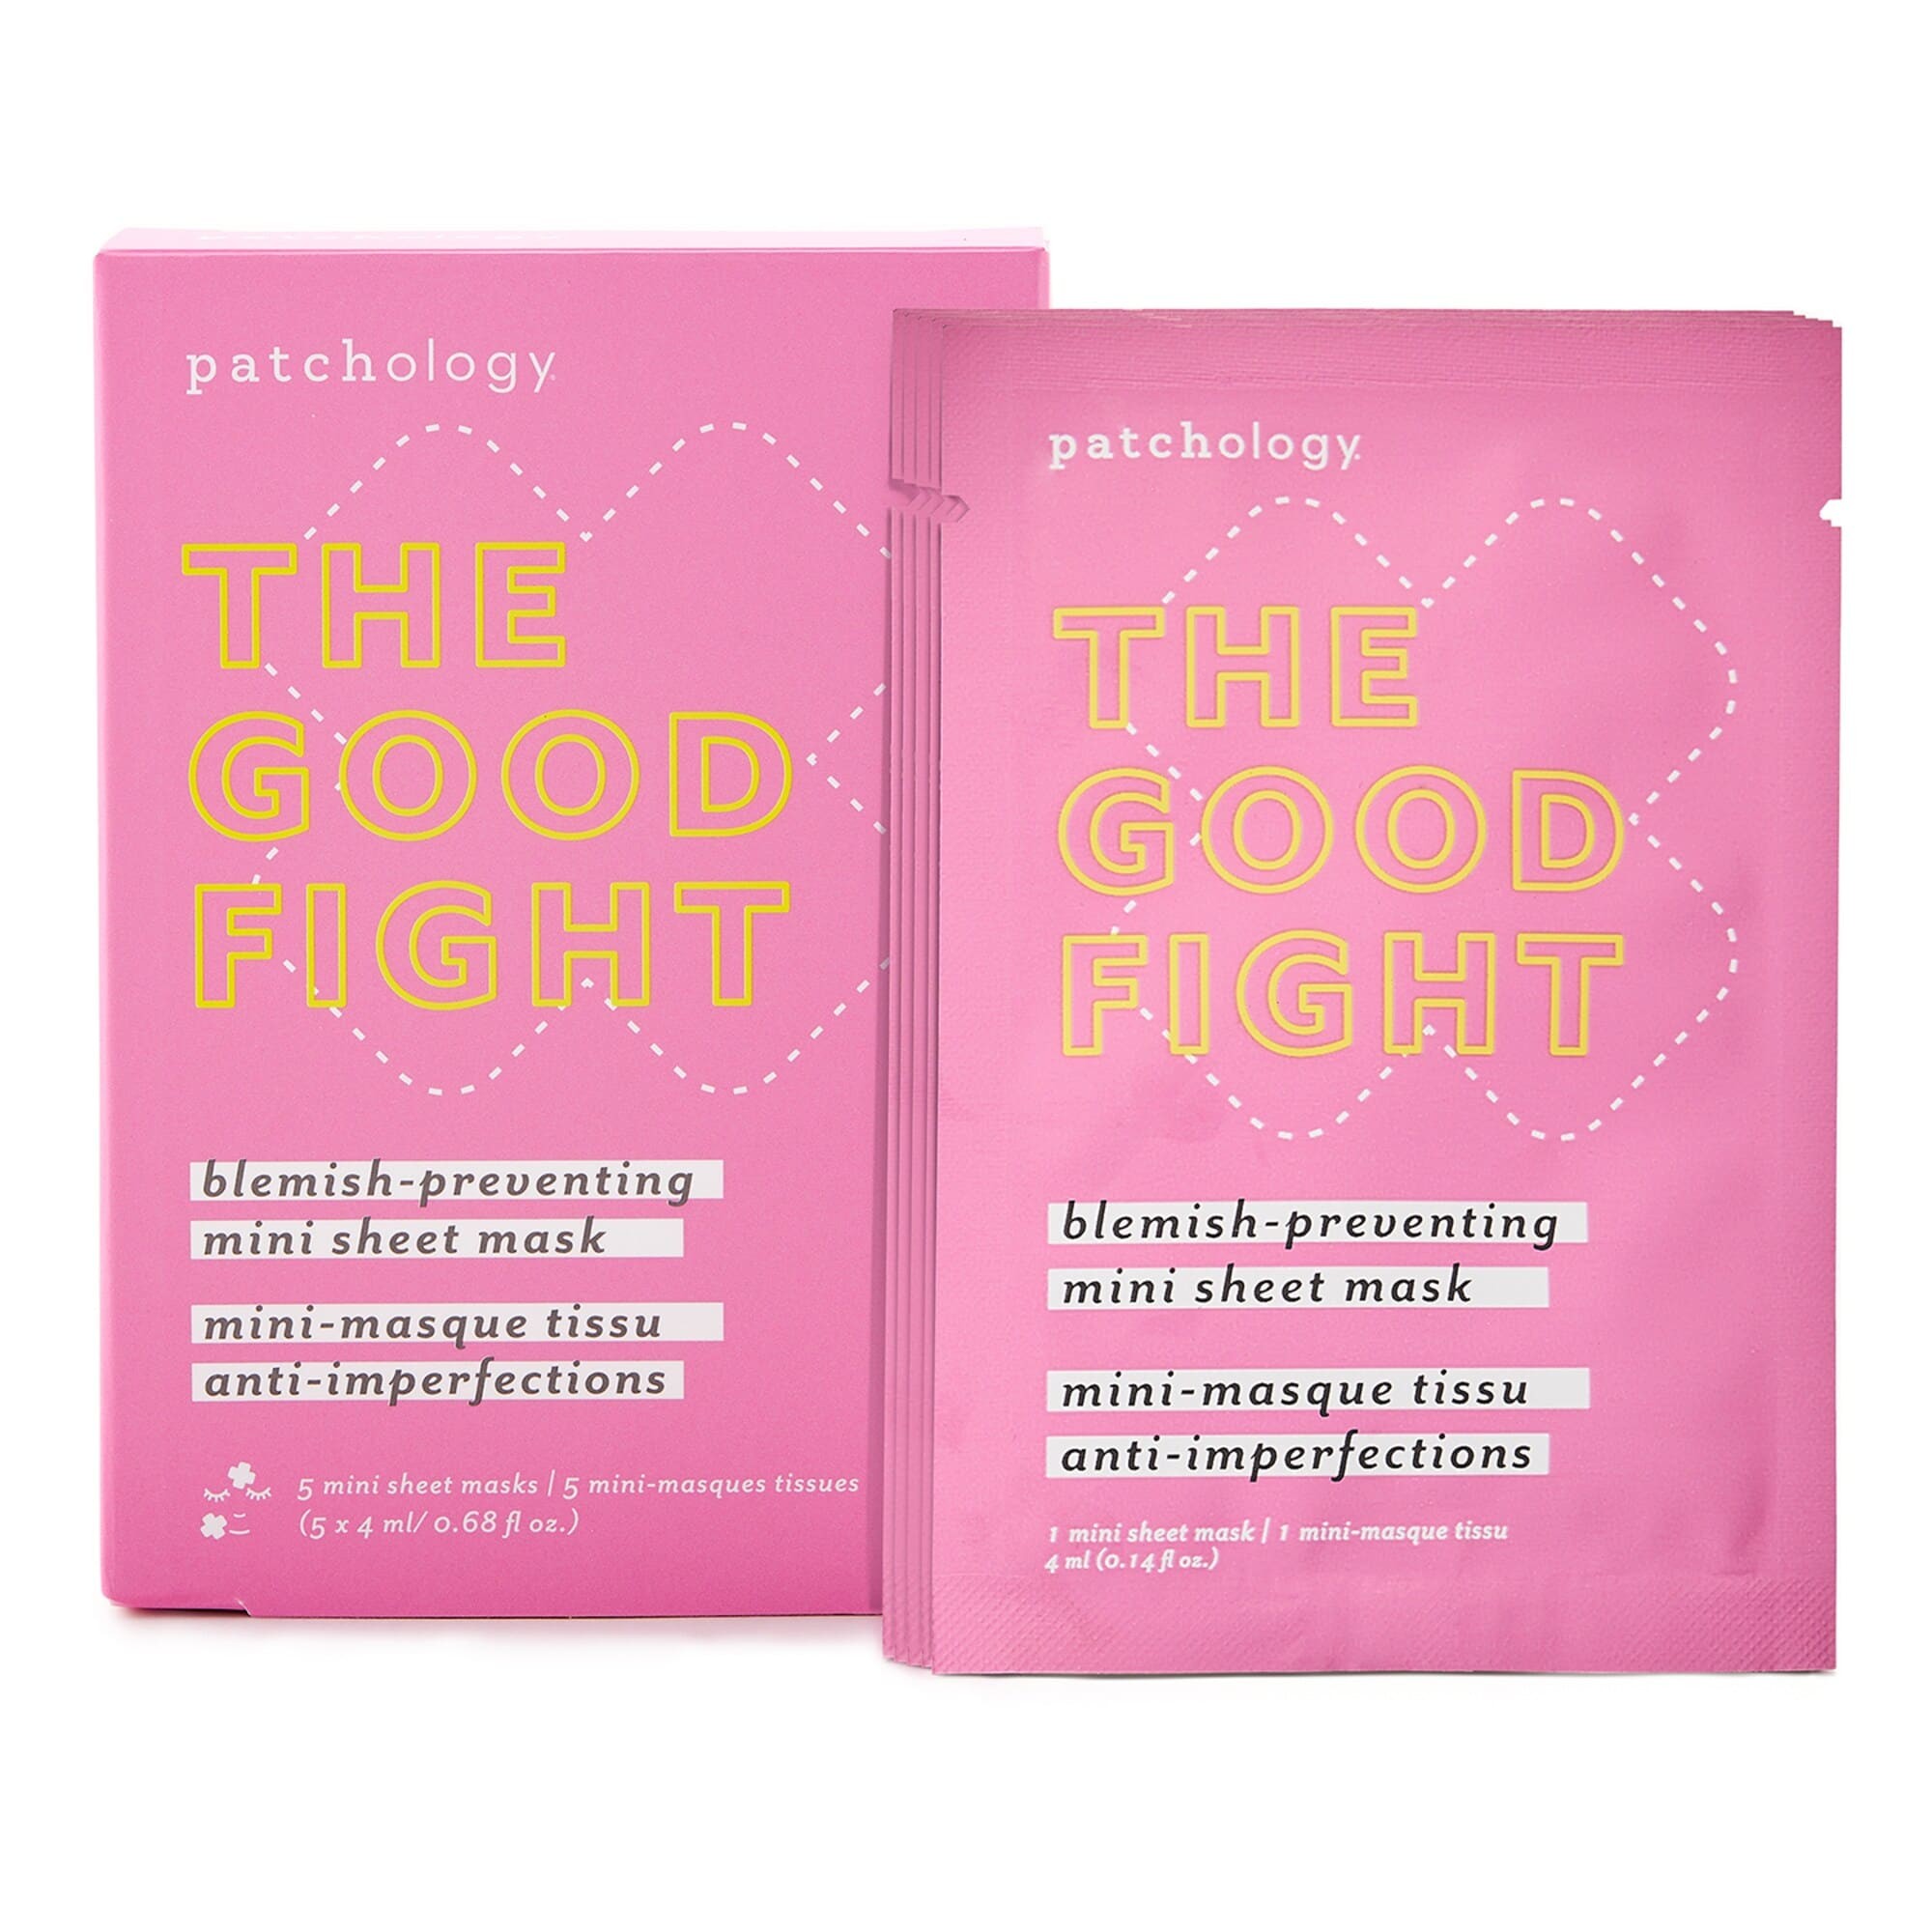 Patchology The Good Fight Clear Skin Mini Sheet Mask 5 Pack